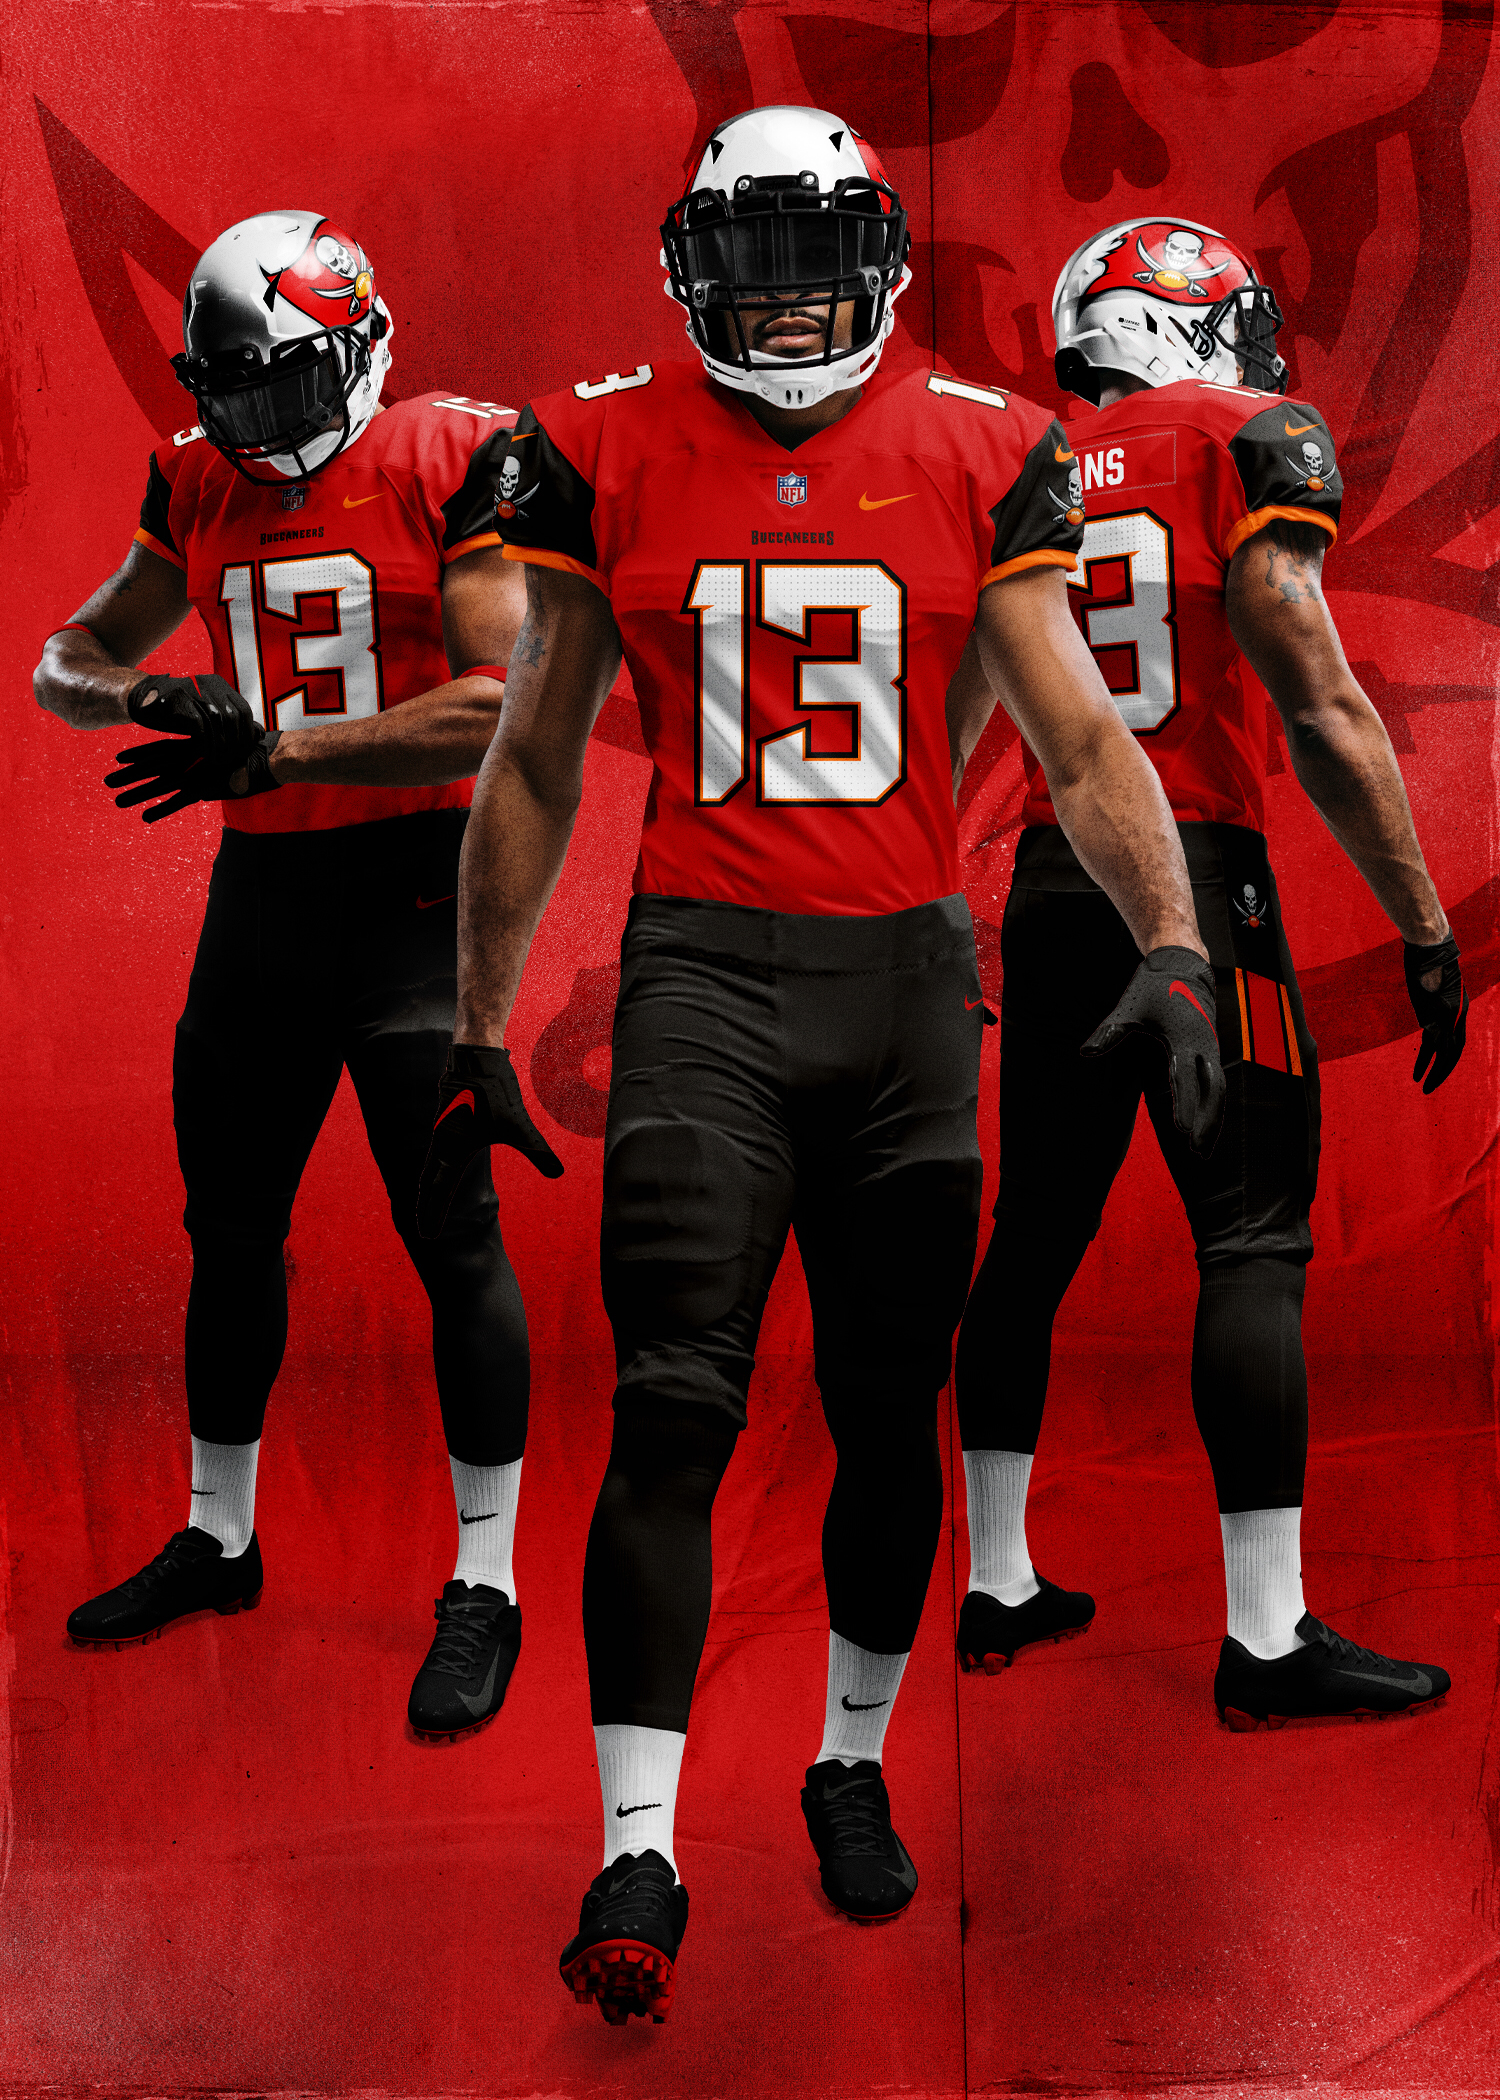 Bucs uniform redesign: An option so crazy it just might work